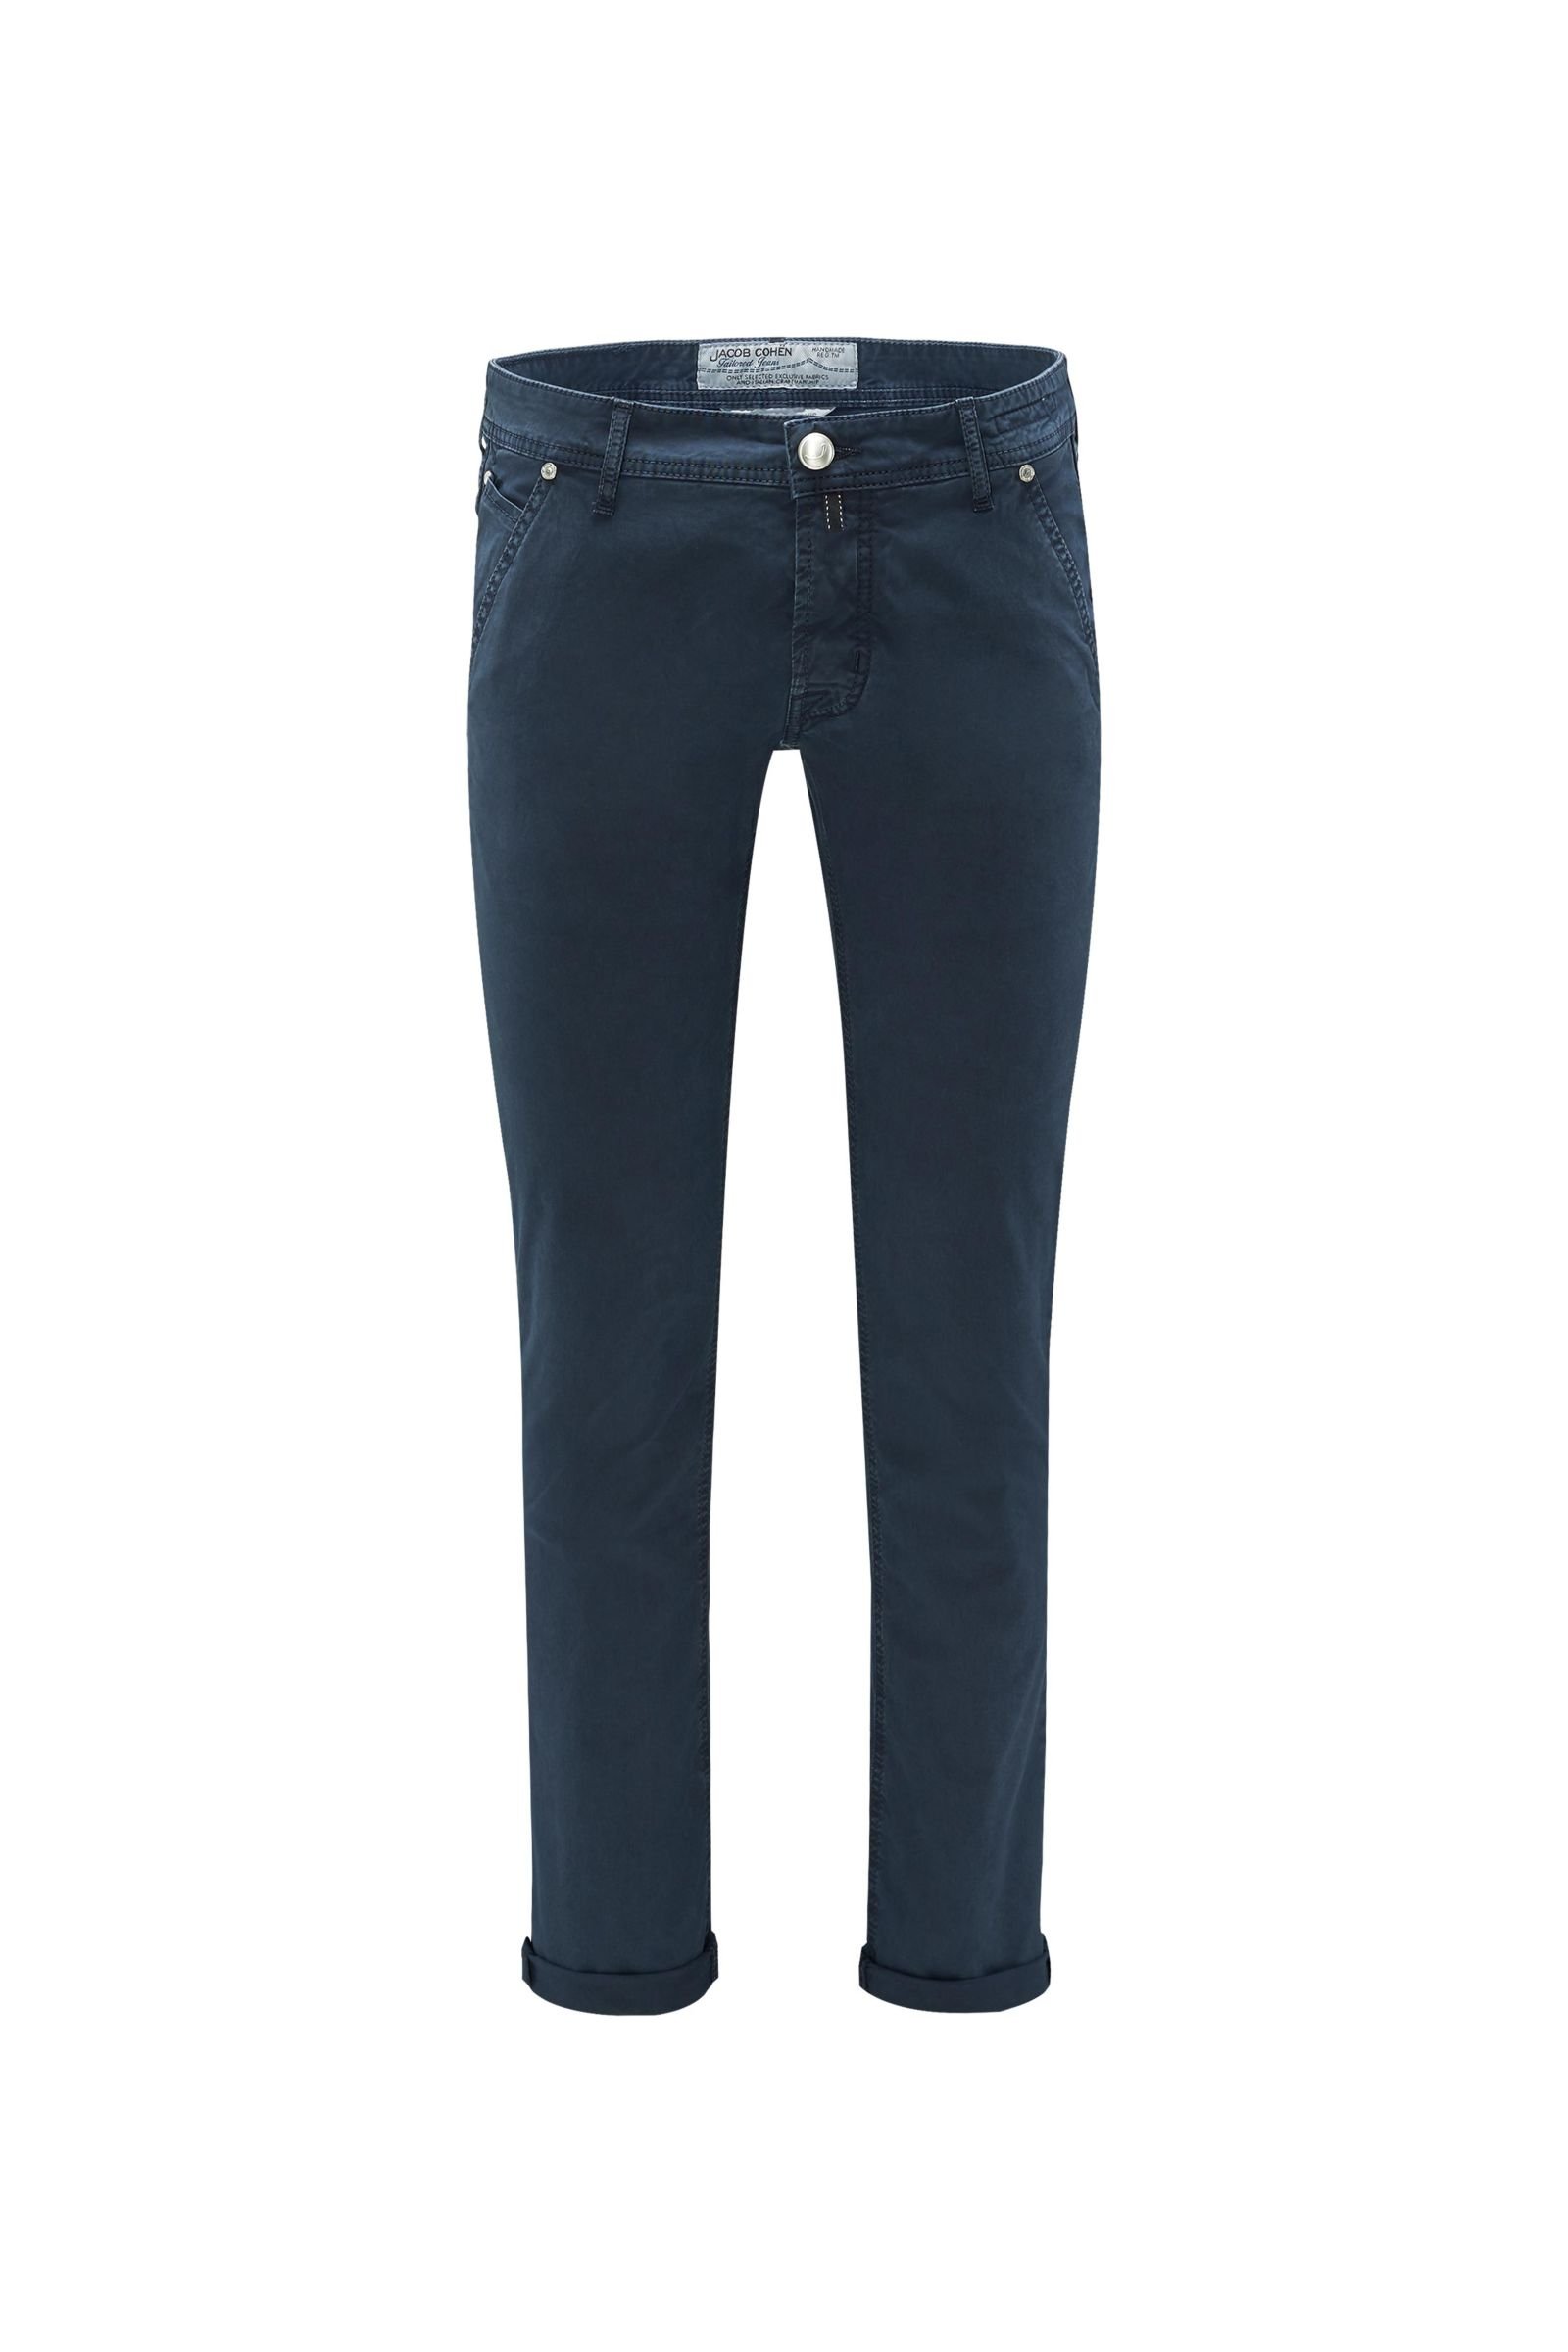 Cotton trousers 'PW613 Comfort' navy